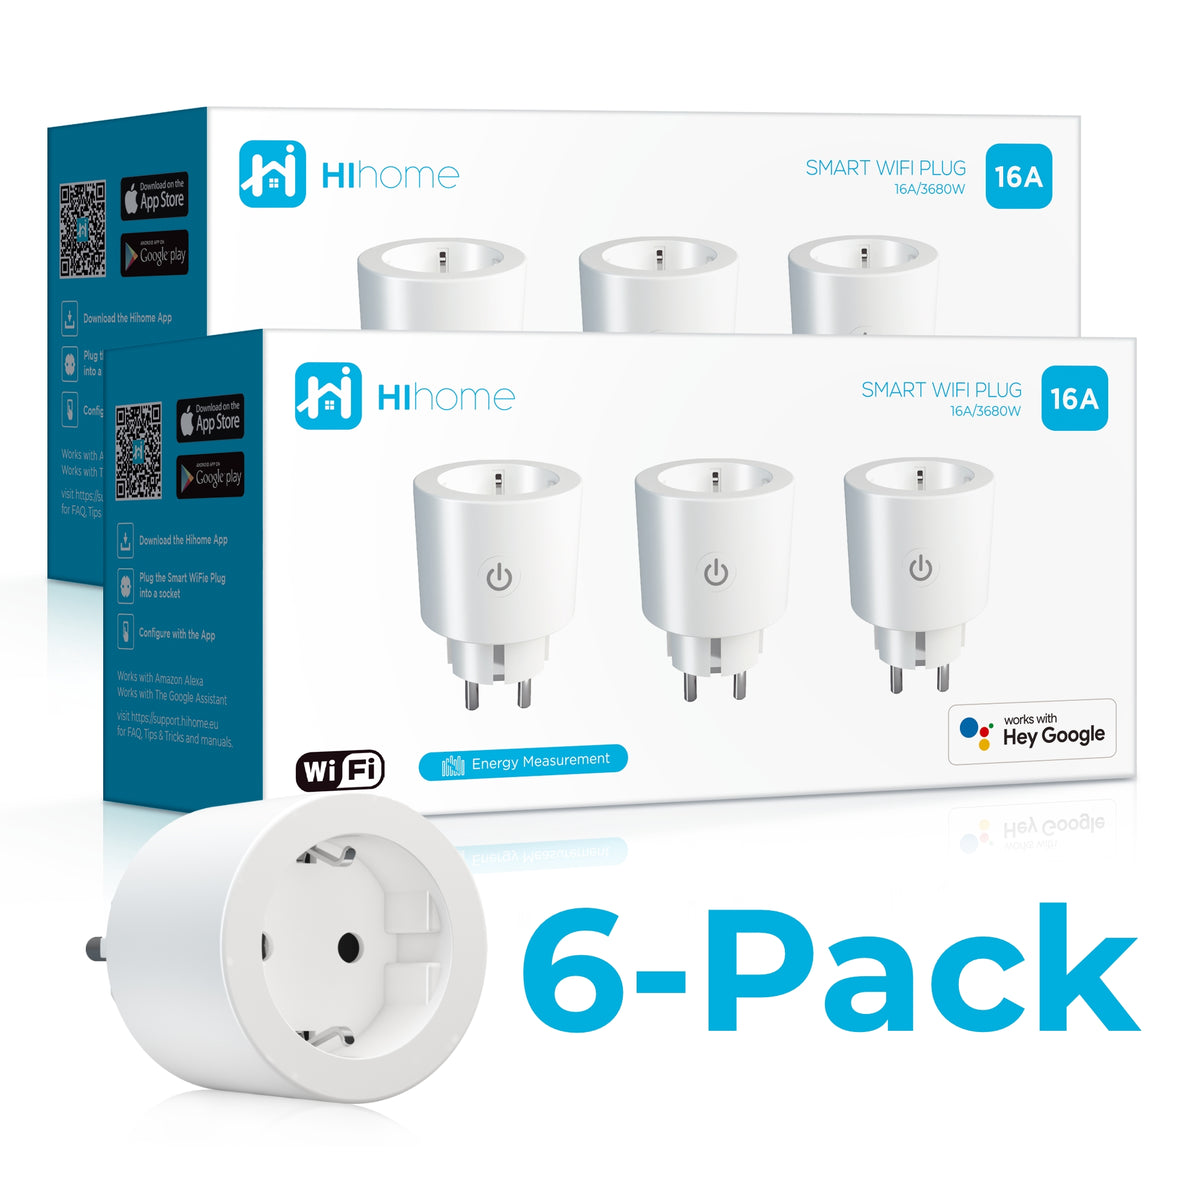 Smart Plug WiFi 16A with energy meter - 6-pack - Hihome